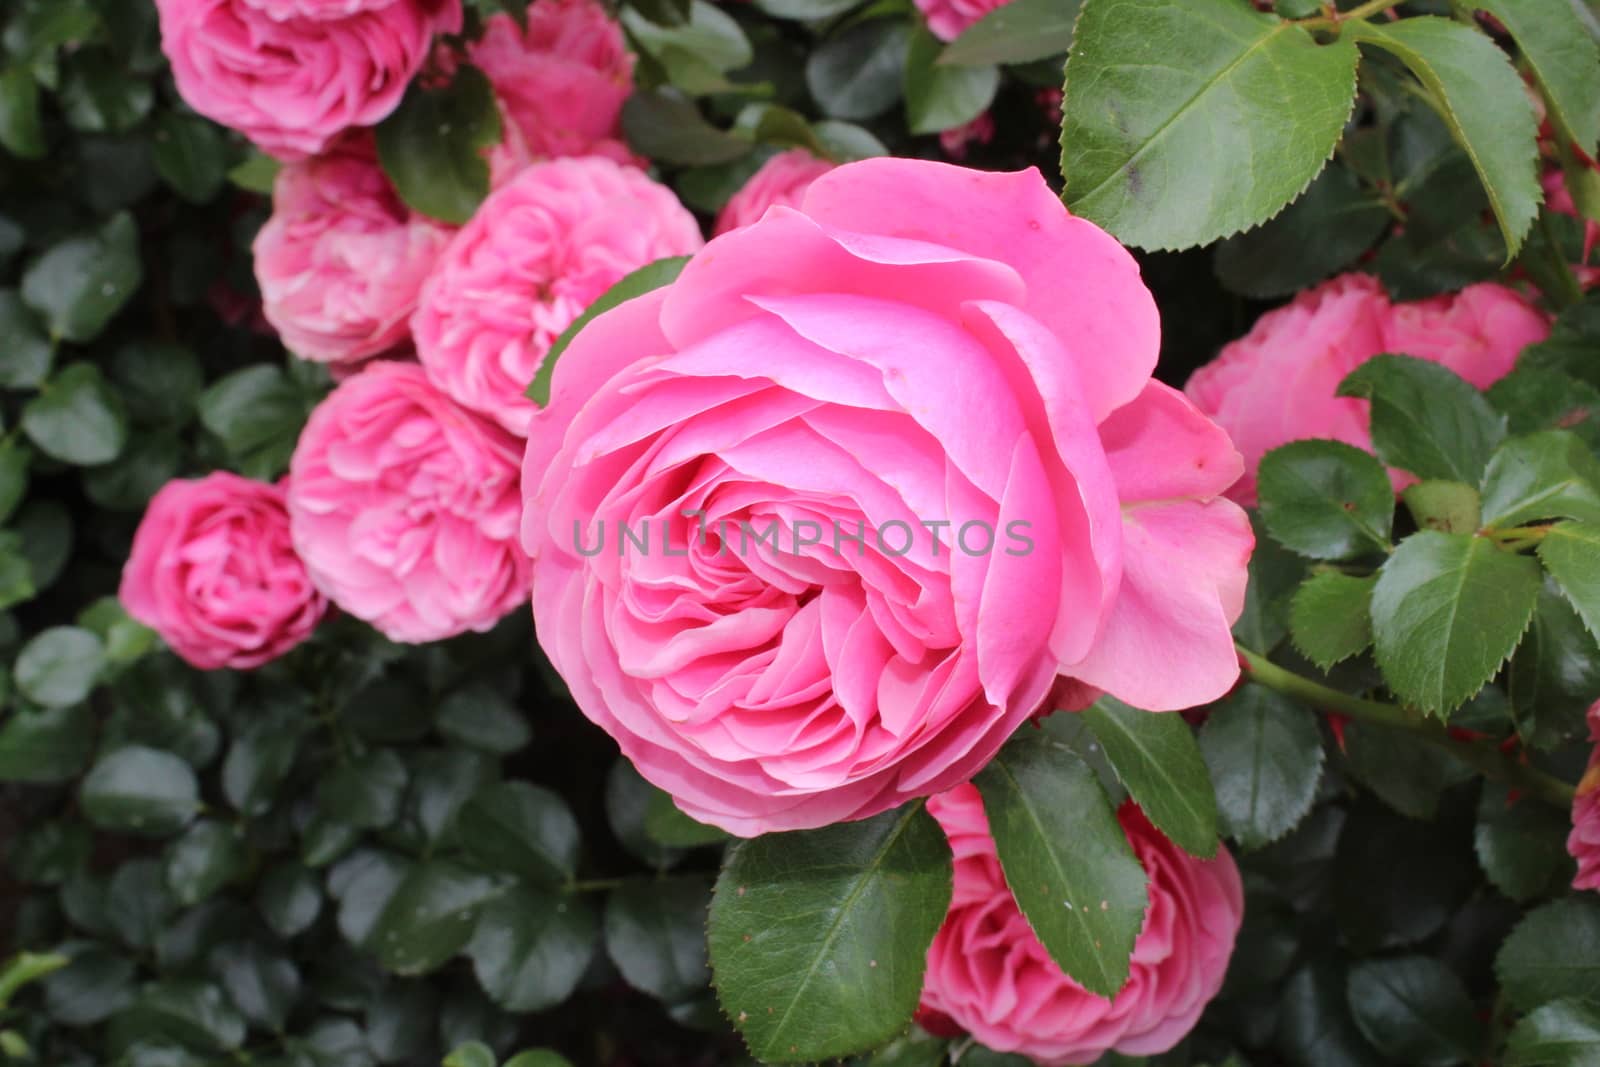 The picture shows pink roses in the garden